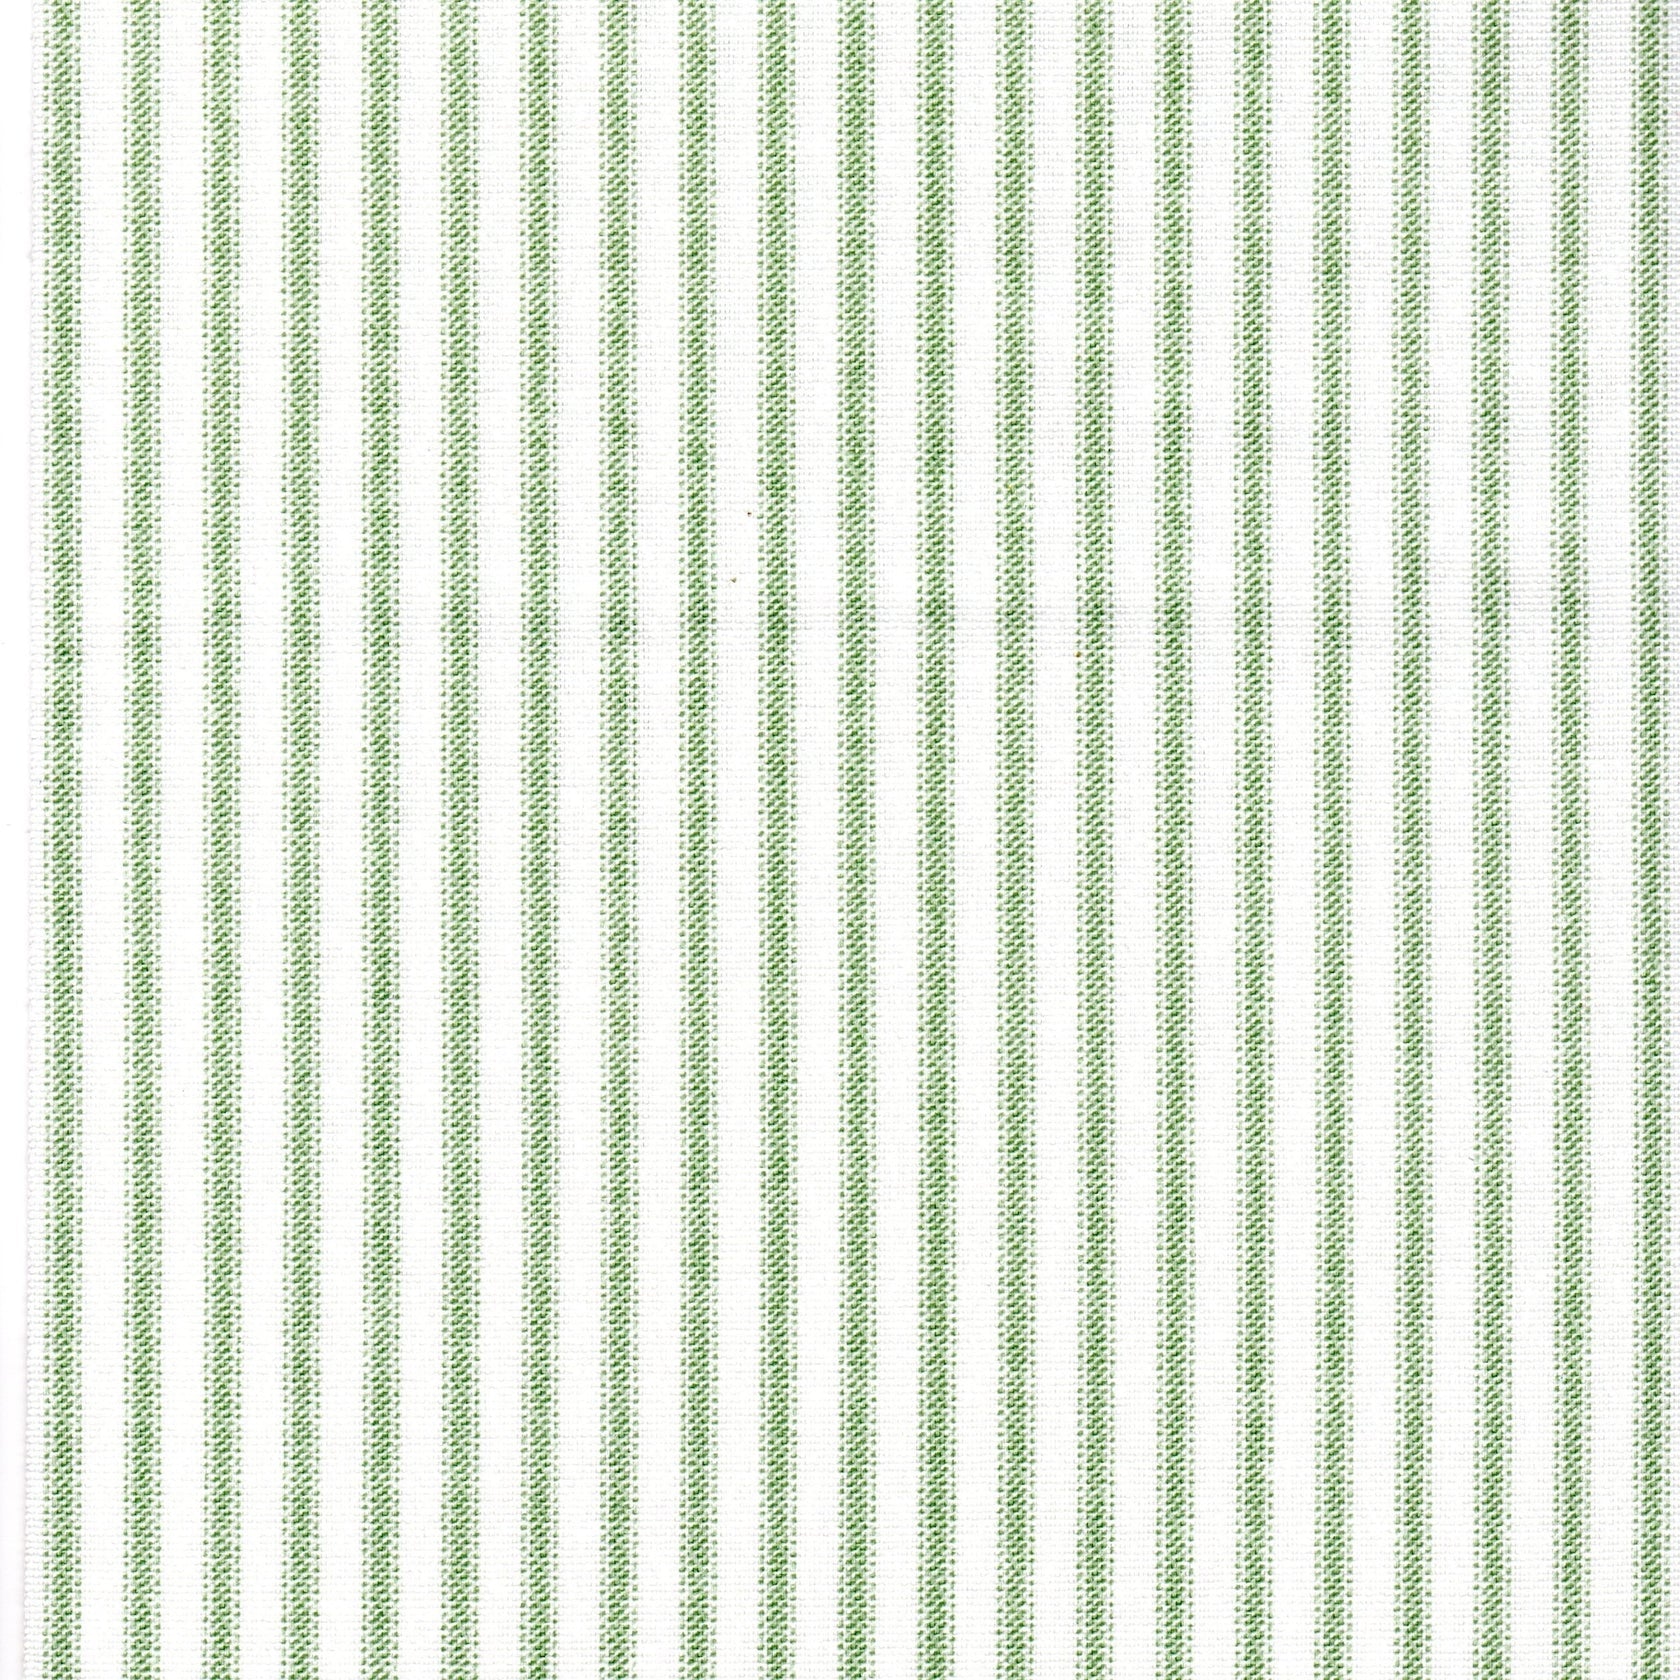 tab top curtains in Classic Sage Green Ticking Stripe on White